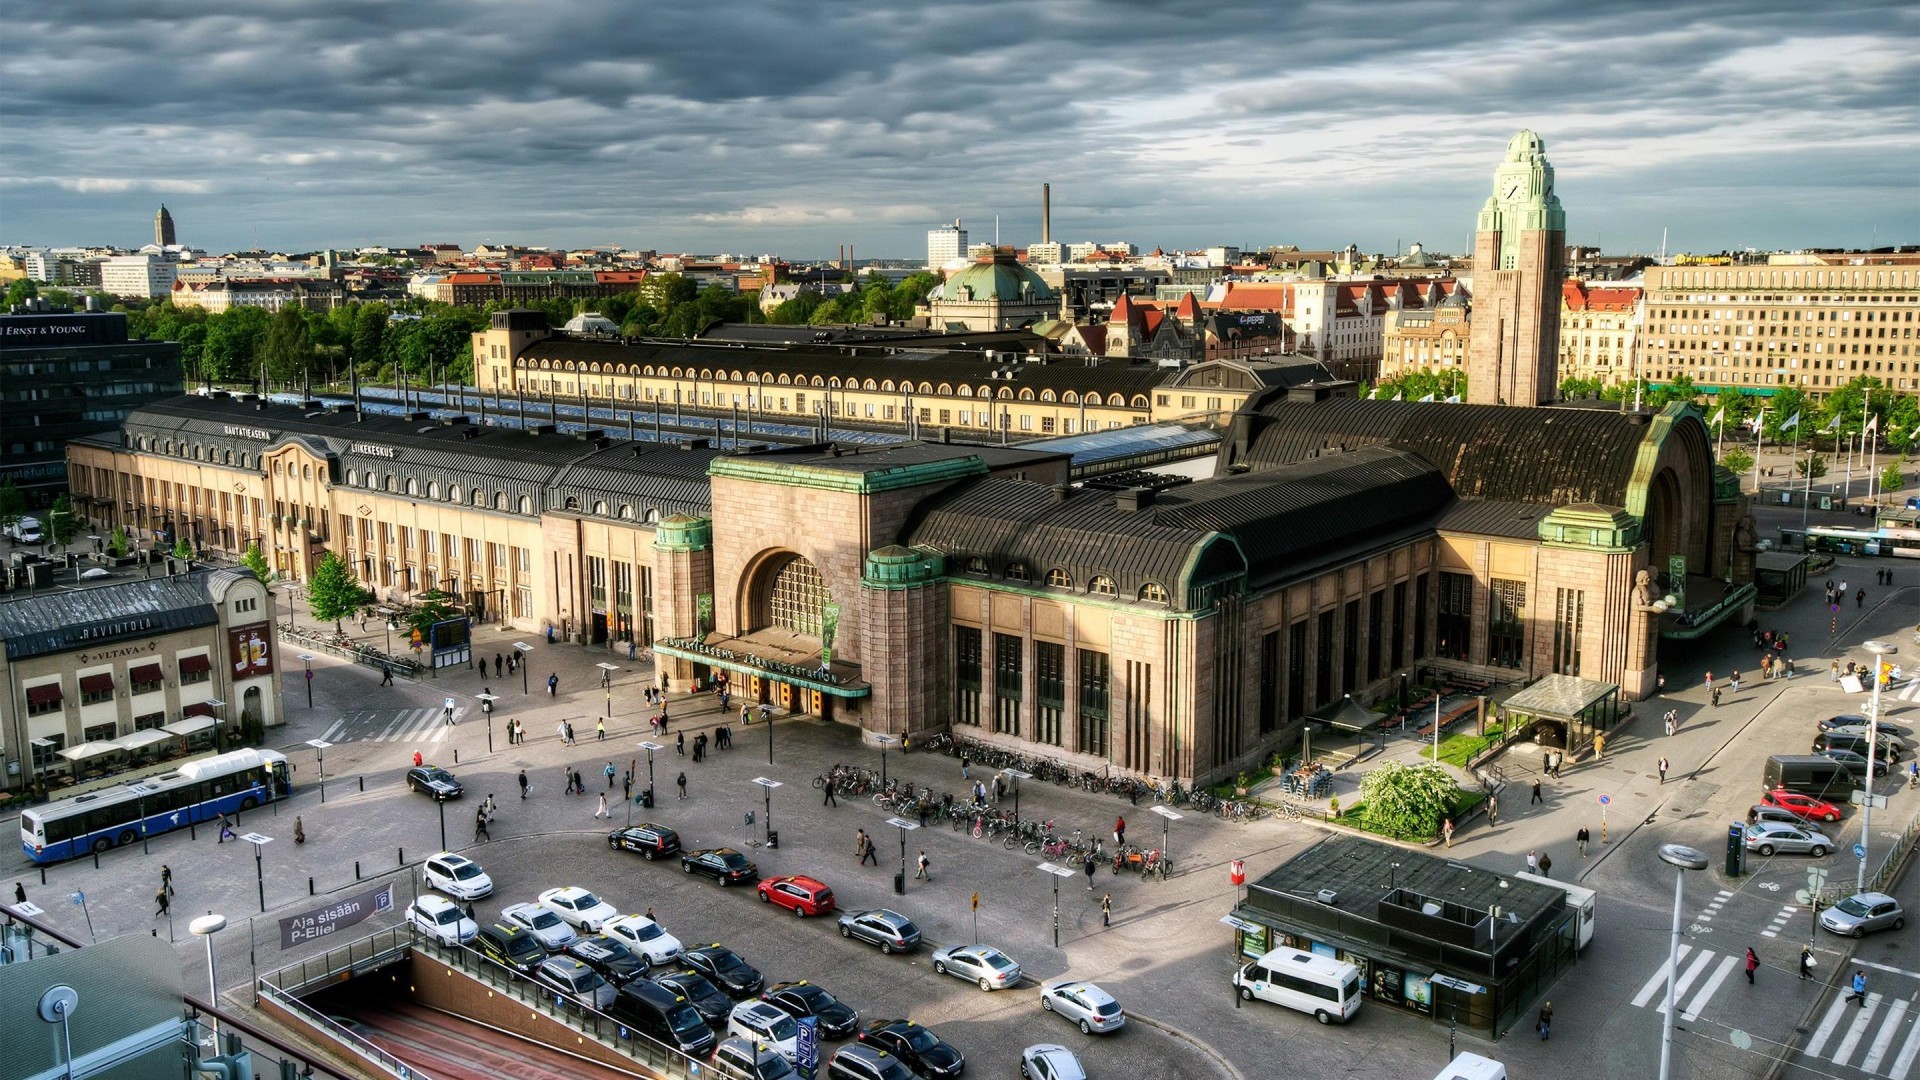 architecture, Cityscape, City, Capital, Building, Street, Car, Helsinki, Finland, Train Station, Tower, Old Building, Crowds, Tunnel, Clouds, Birds Eye View Wallpaper